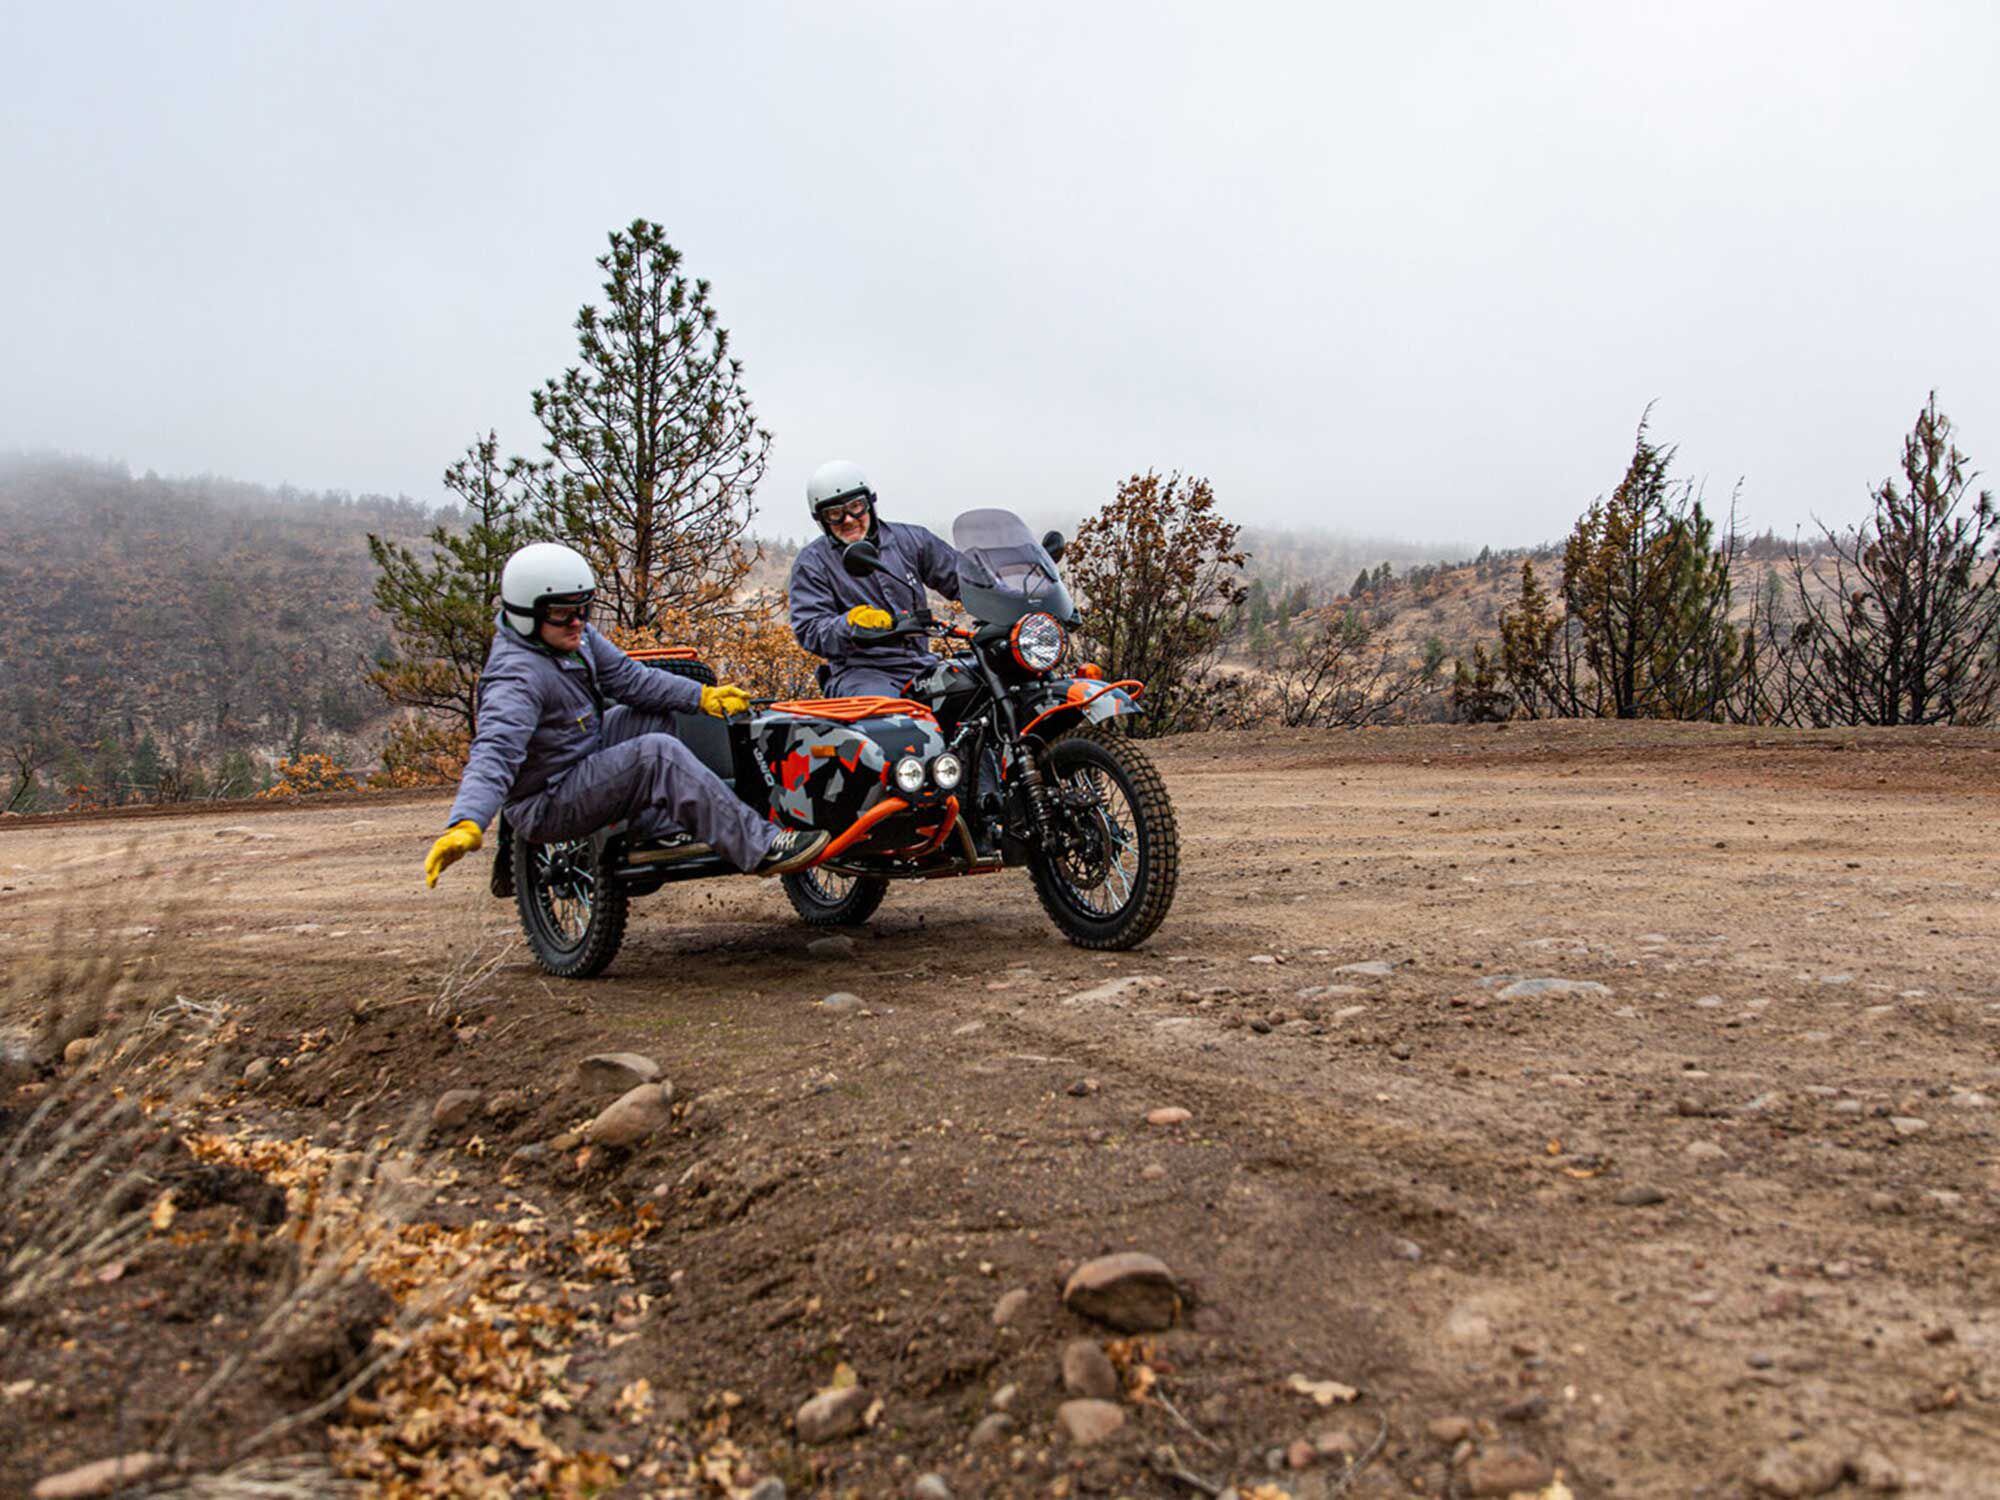 Ural has really played up the wildness of the 2021 Ural Gear Up GEO LE.